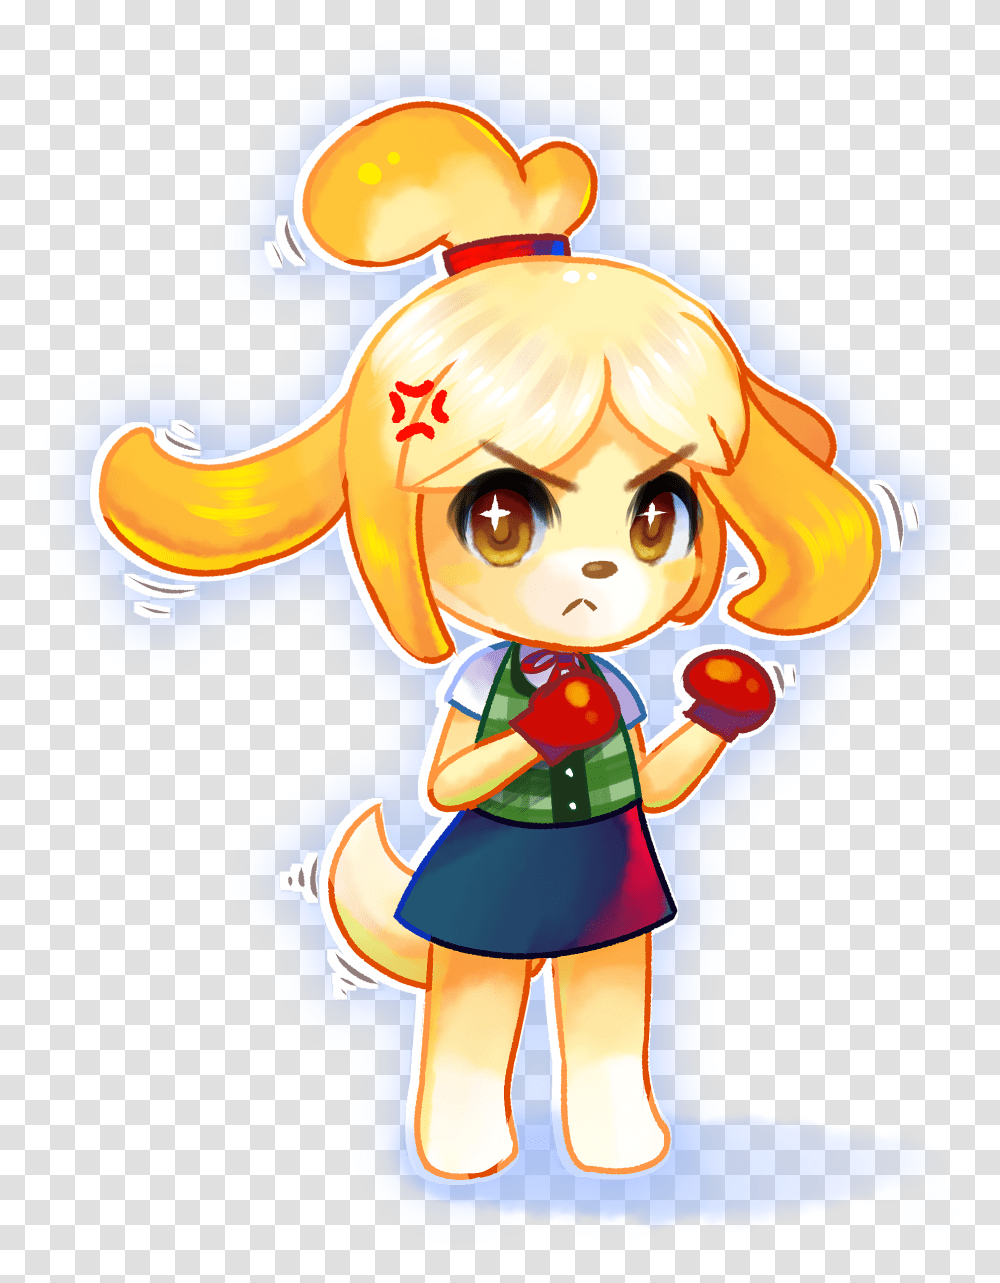 A Quick Doodle Of Isabelle Training For Animal Crossing Isabelle Angry, Graphics, Art, Manga, Comics Transparent Png